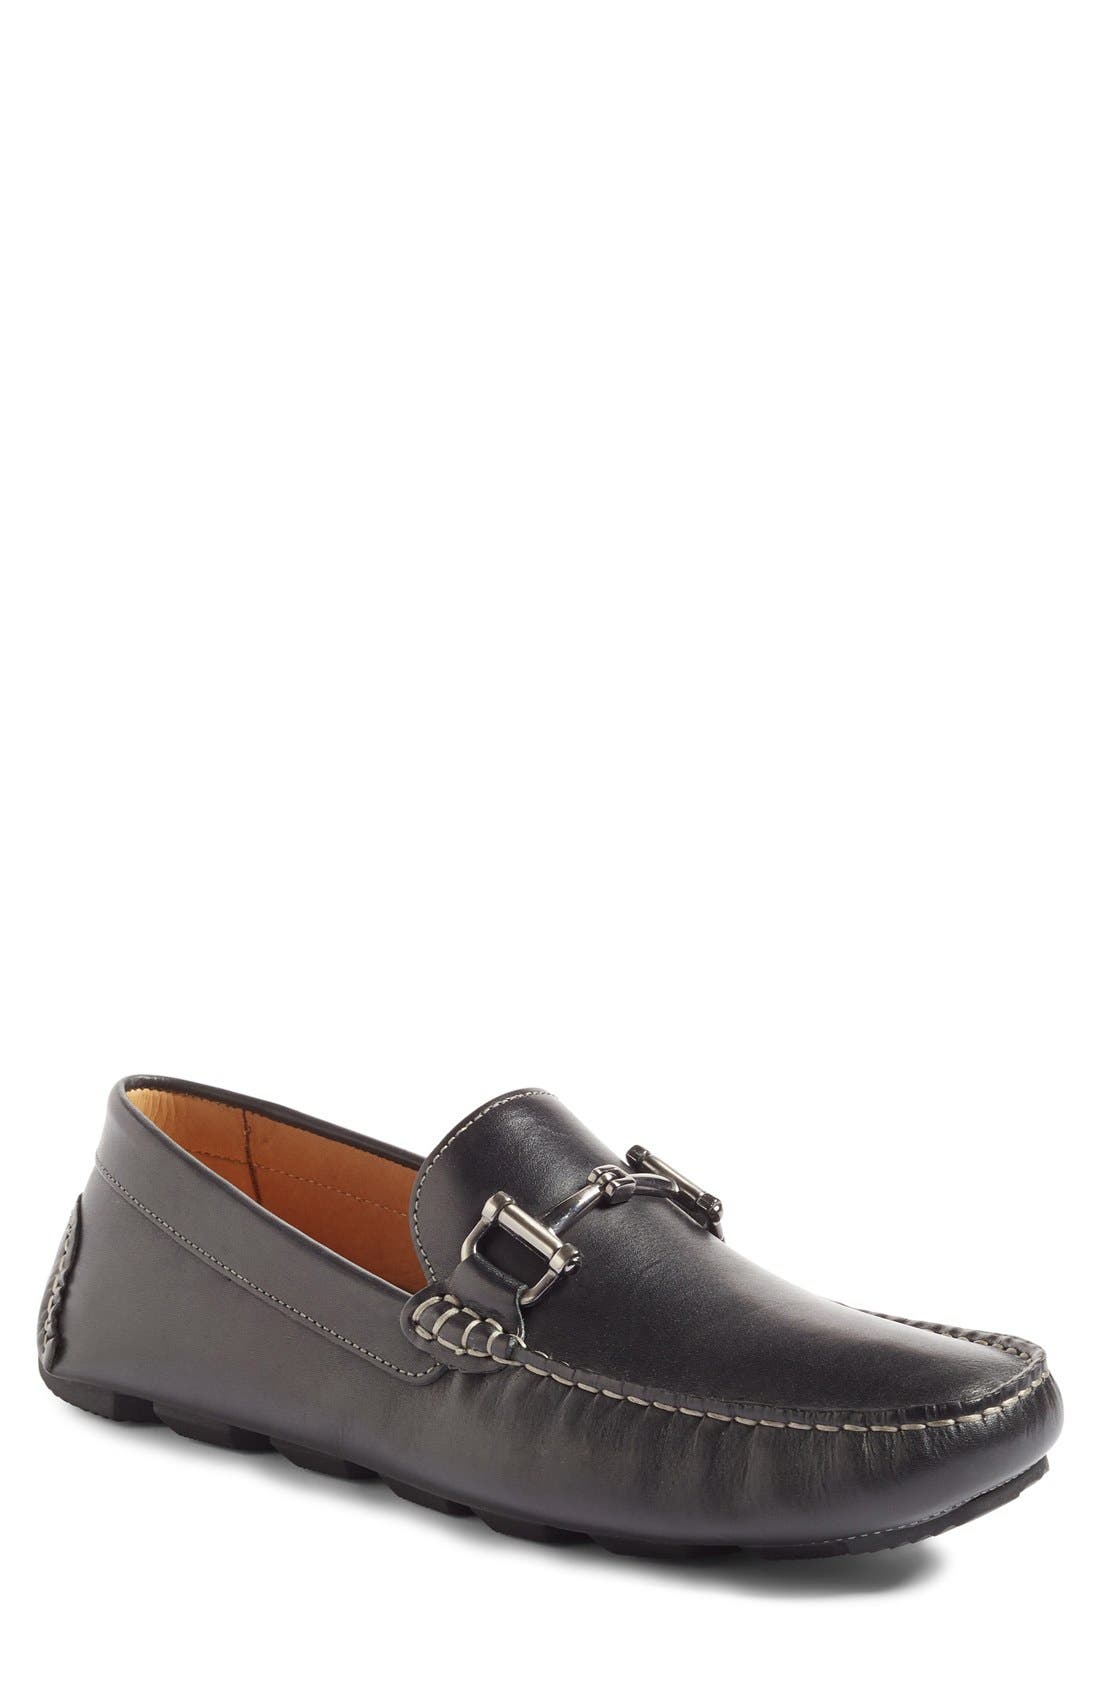 1901 mens loafers